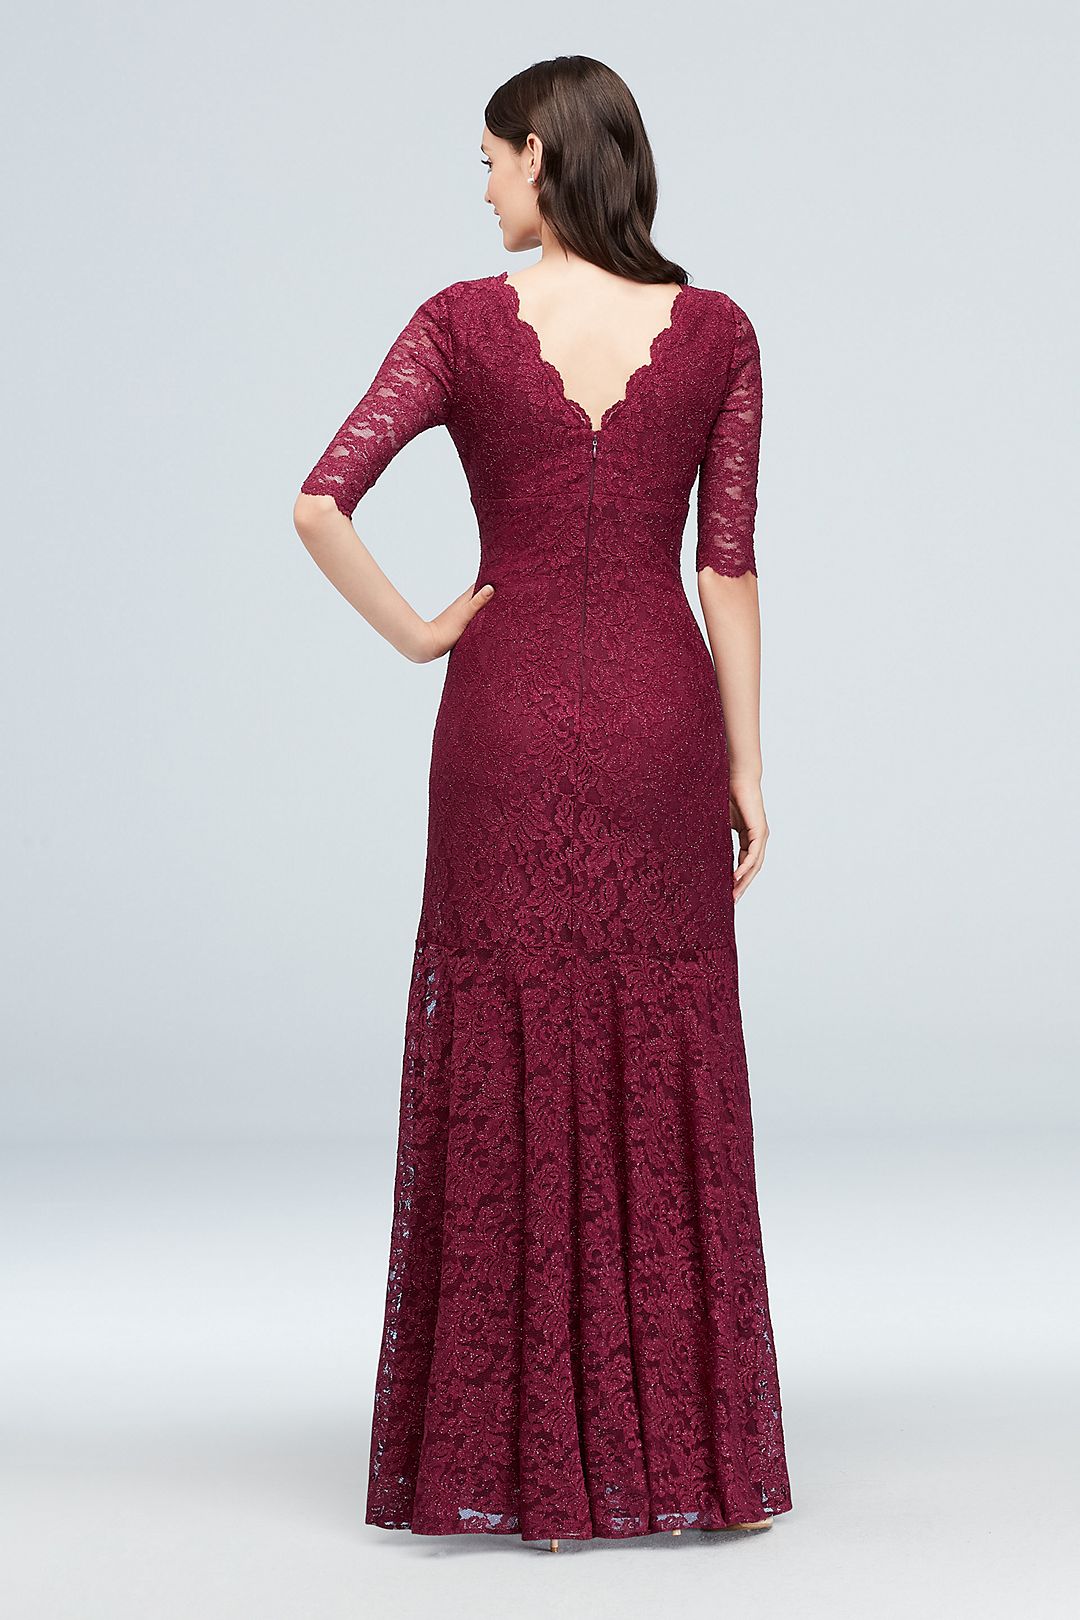 V-Neck Ruched Lace Mermaid Gown with 3/4 Sleeves Image 2